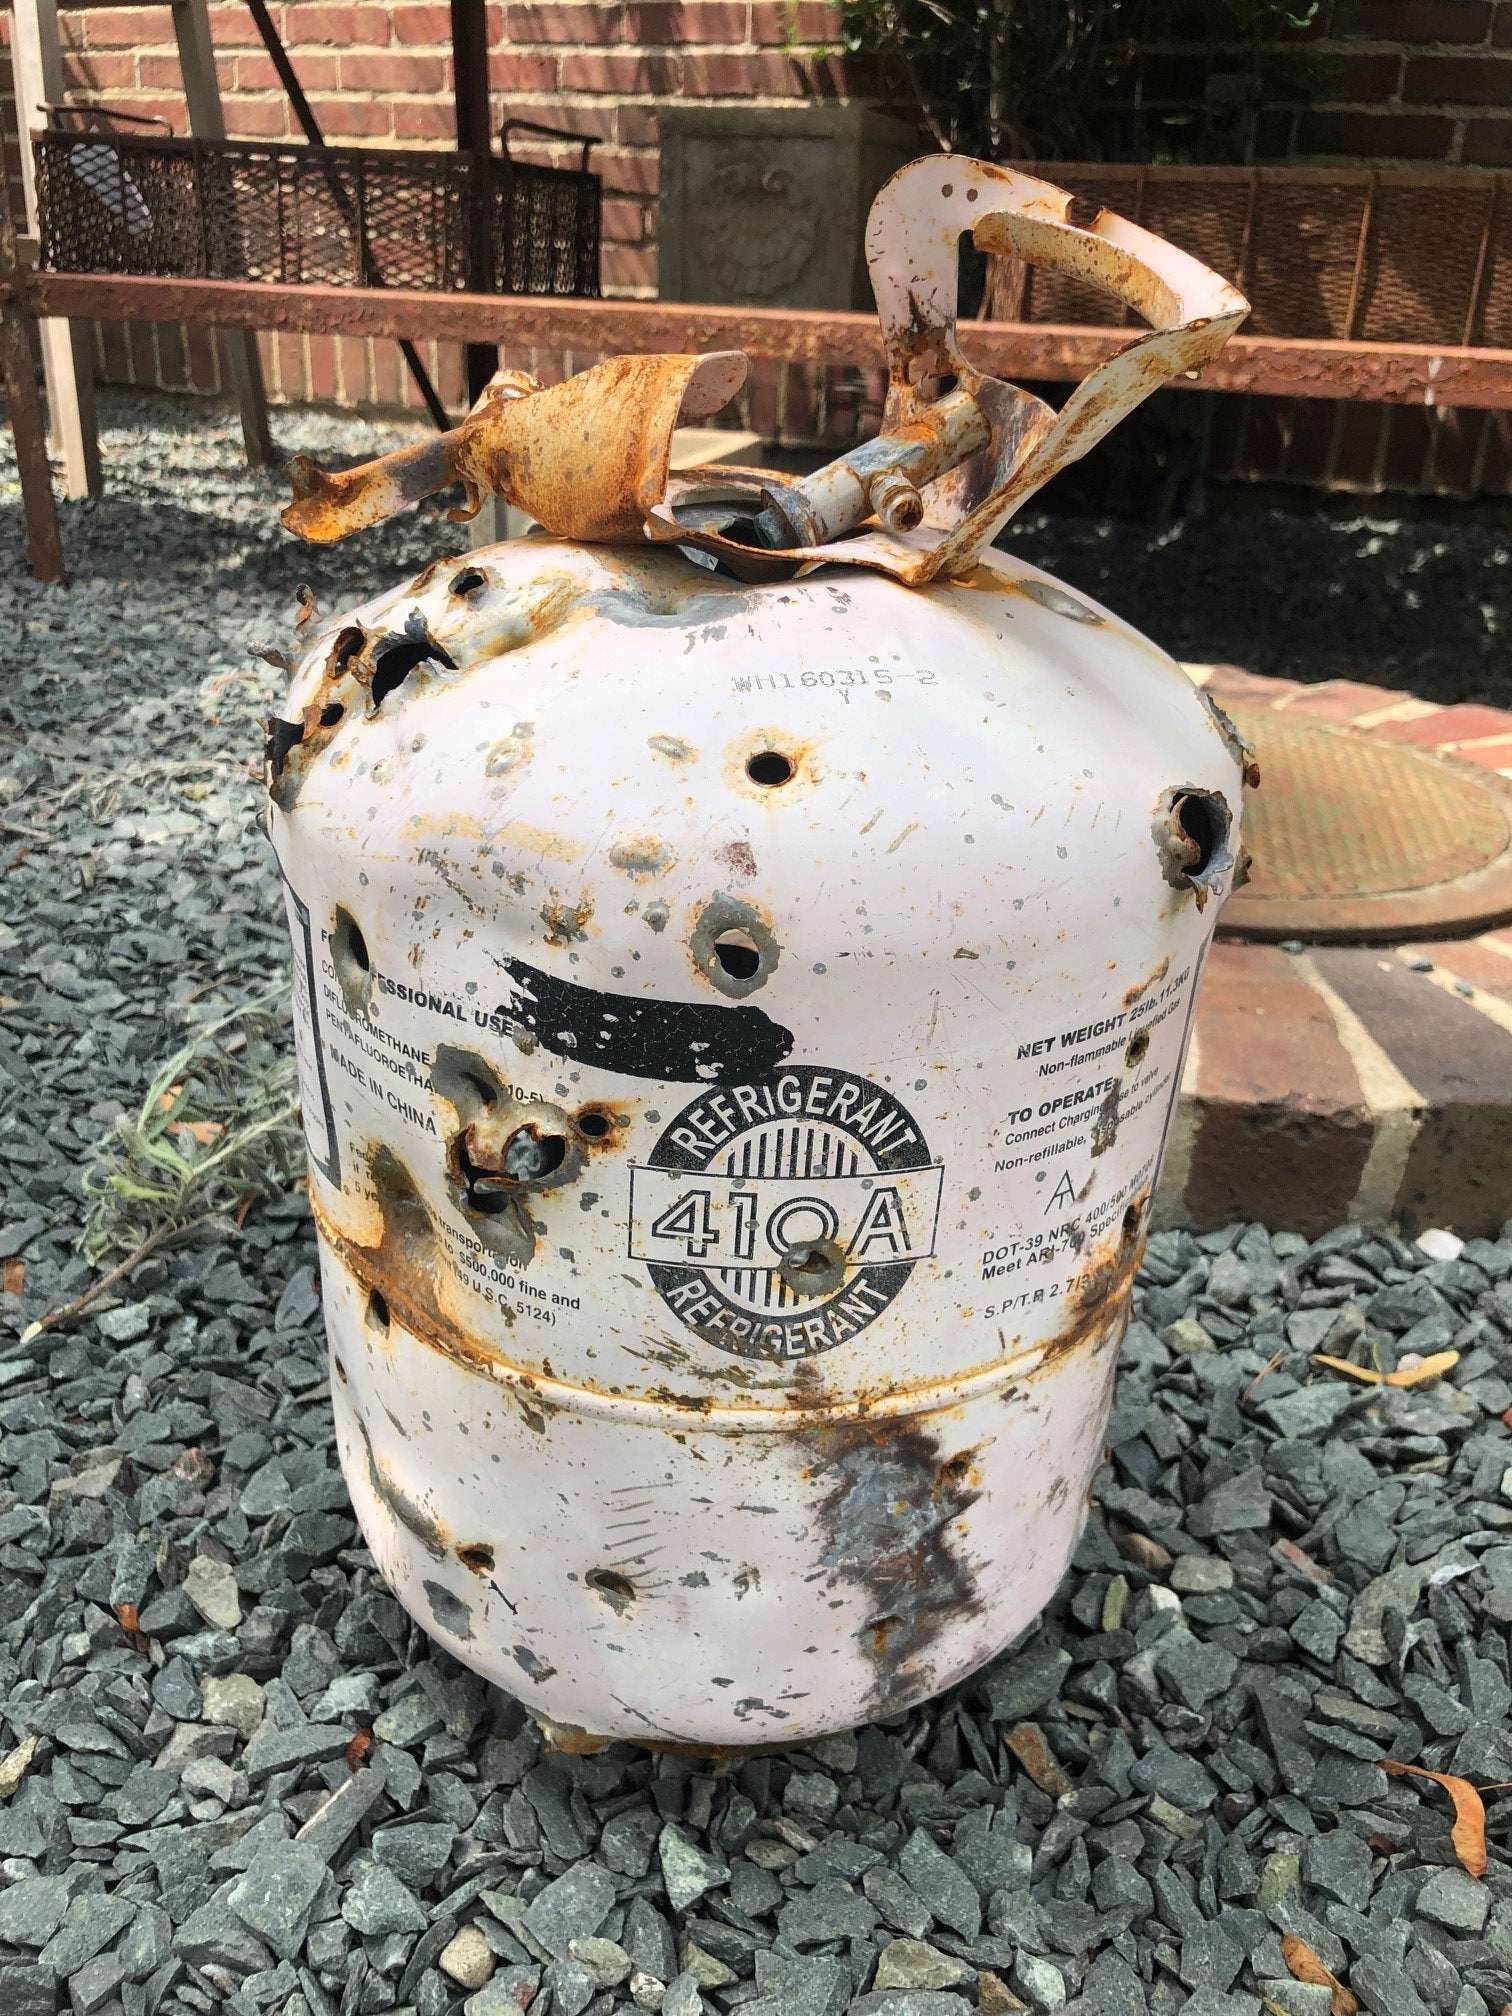 How to Cut a Propane Tank in Half Without Dying – M. R. Nuss Design Co.